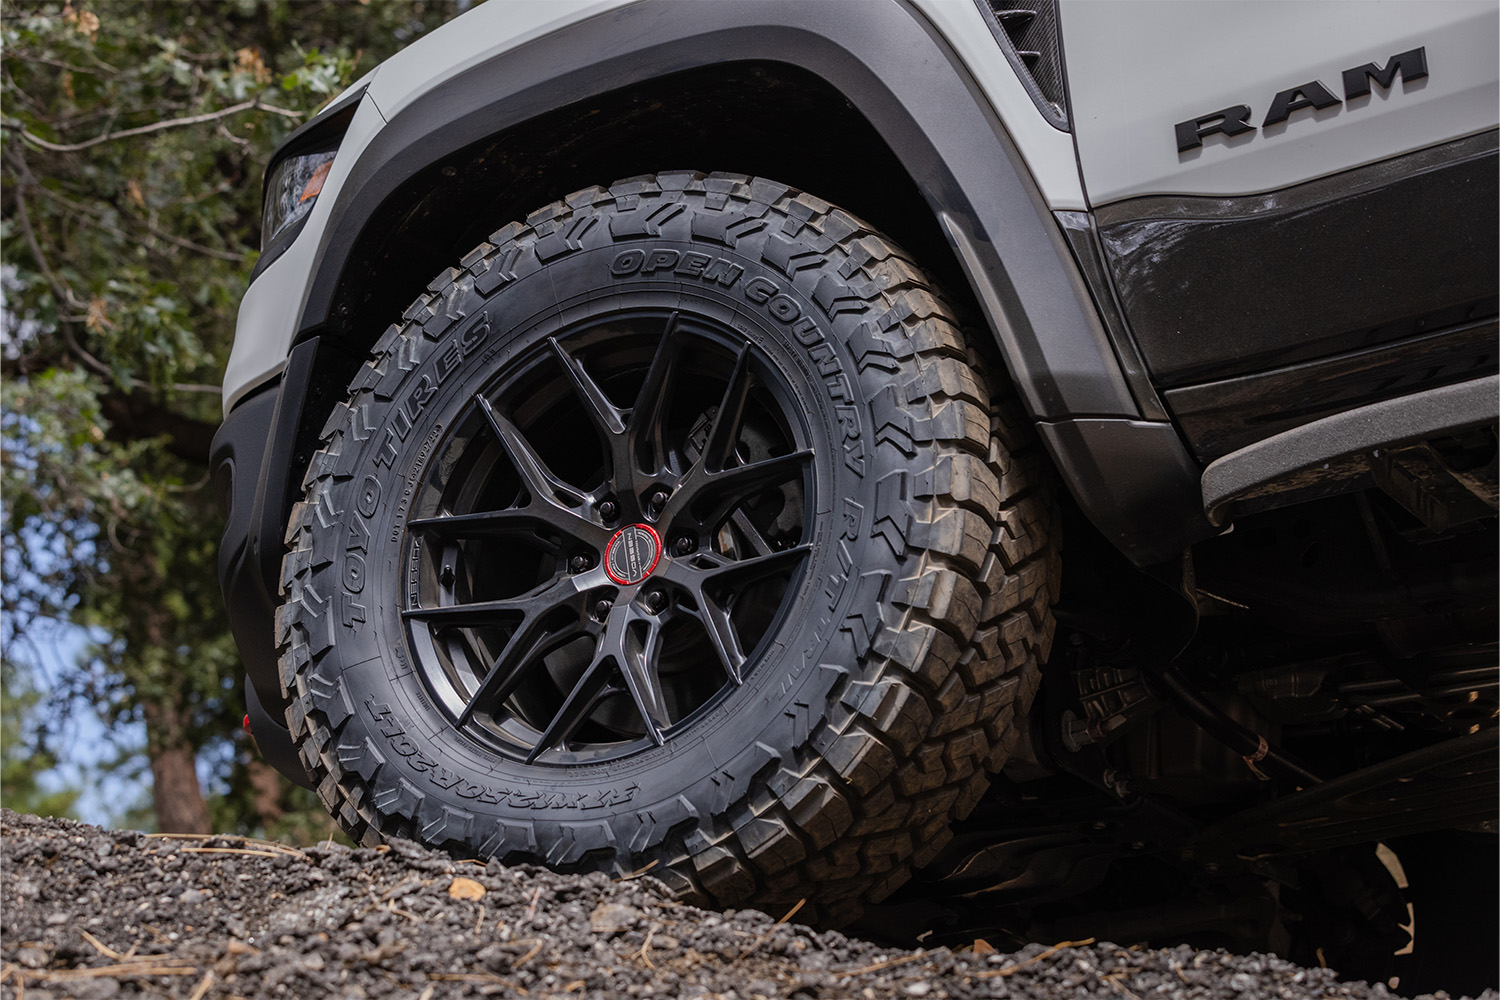 Toyo Tires® Introduces the Open Country R/T Trail, an All-New On- and Off-Road Rugged Terrain Tire